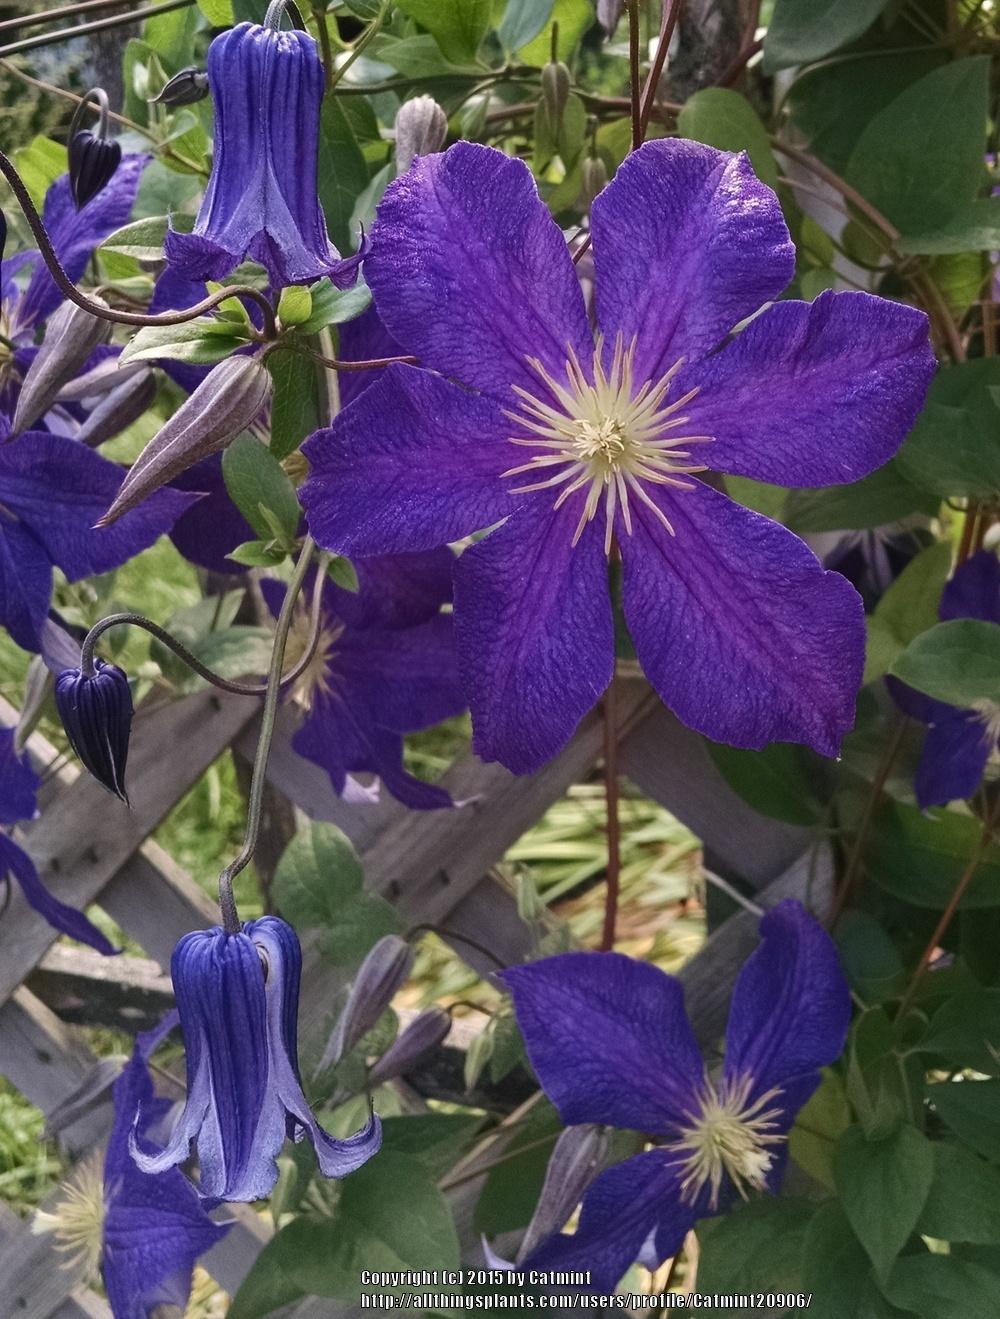 Photo of Clematis uploaded by Catmint20906